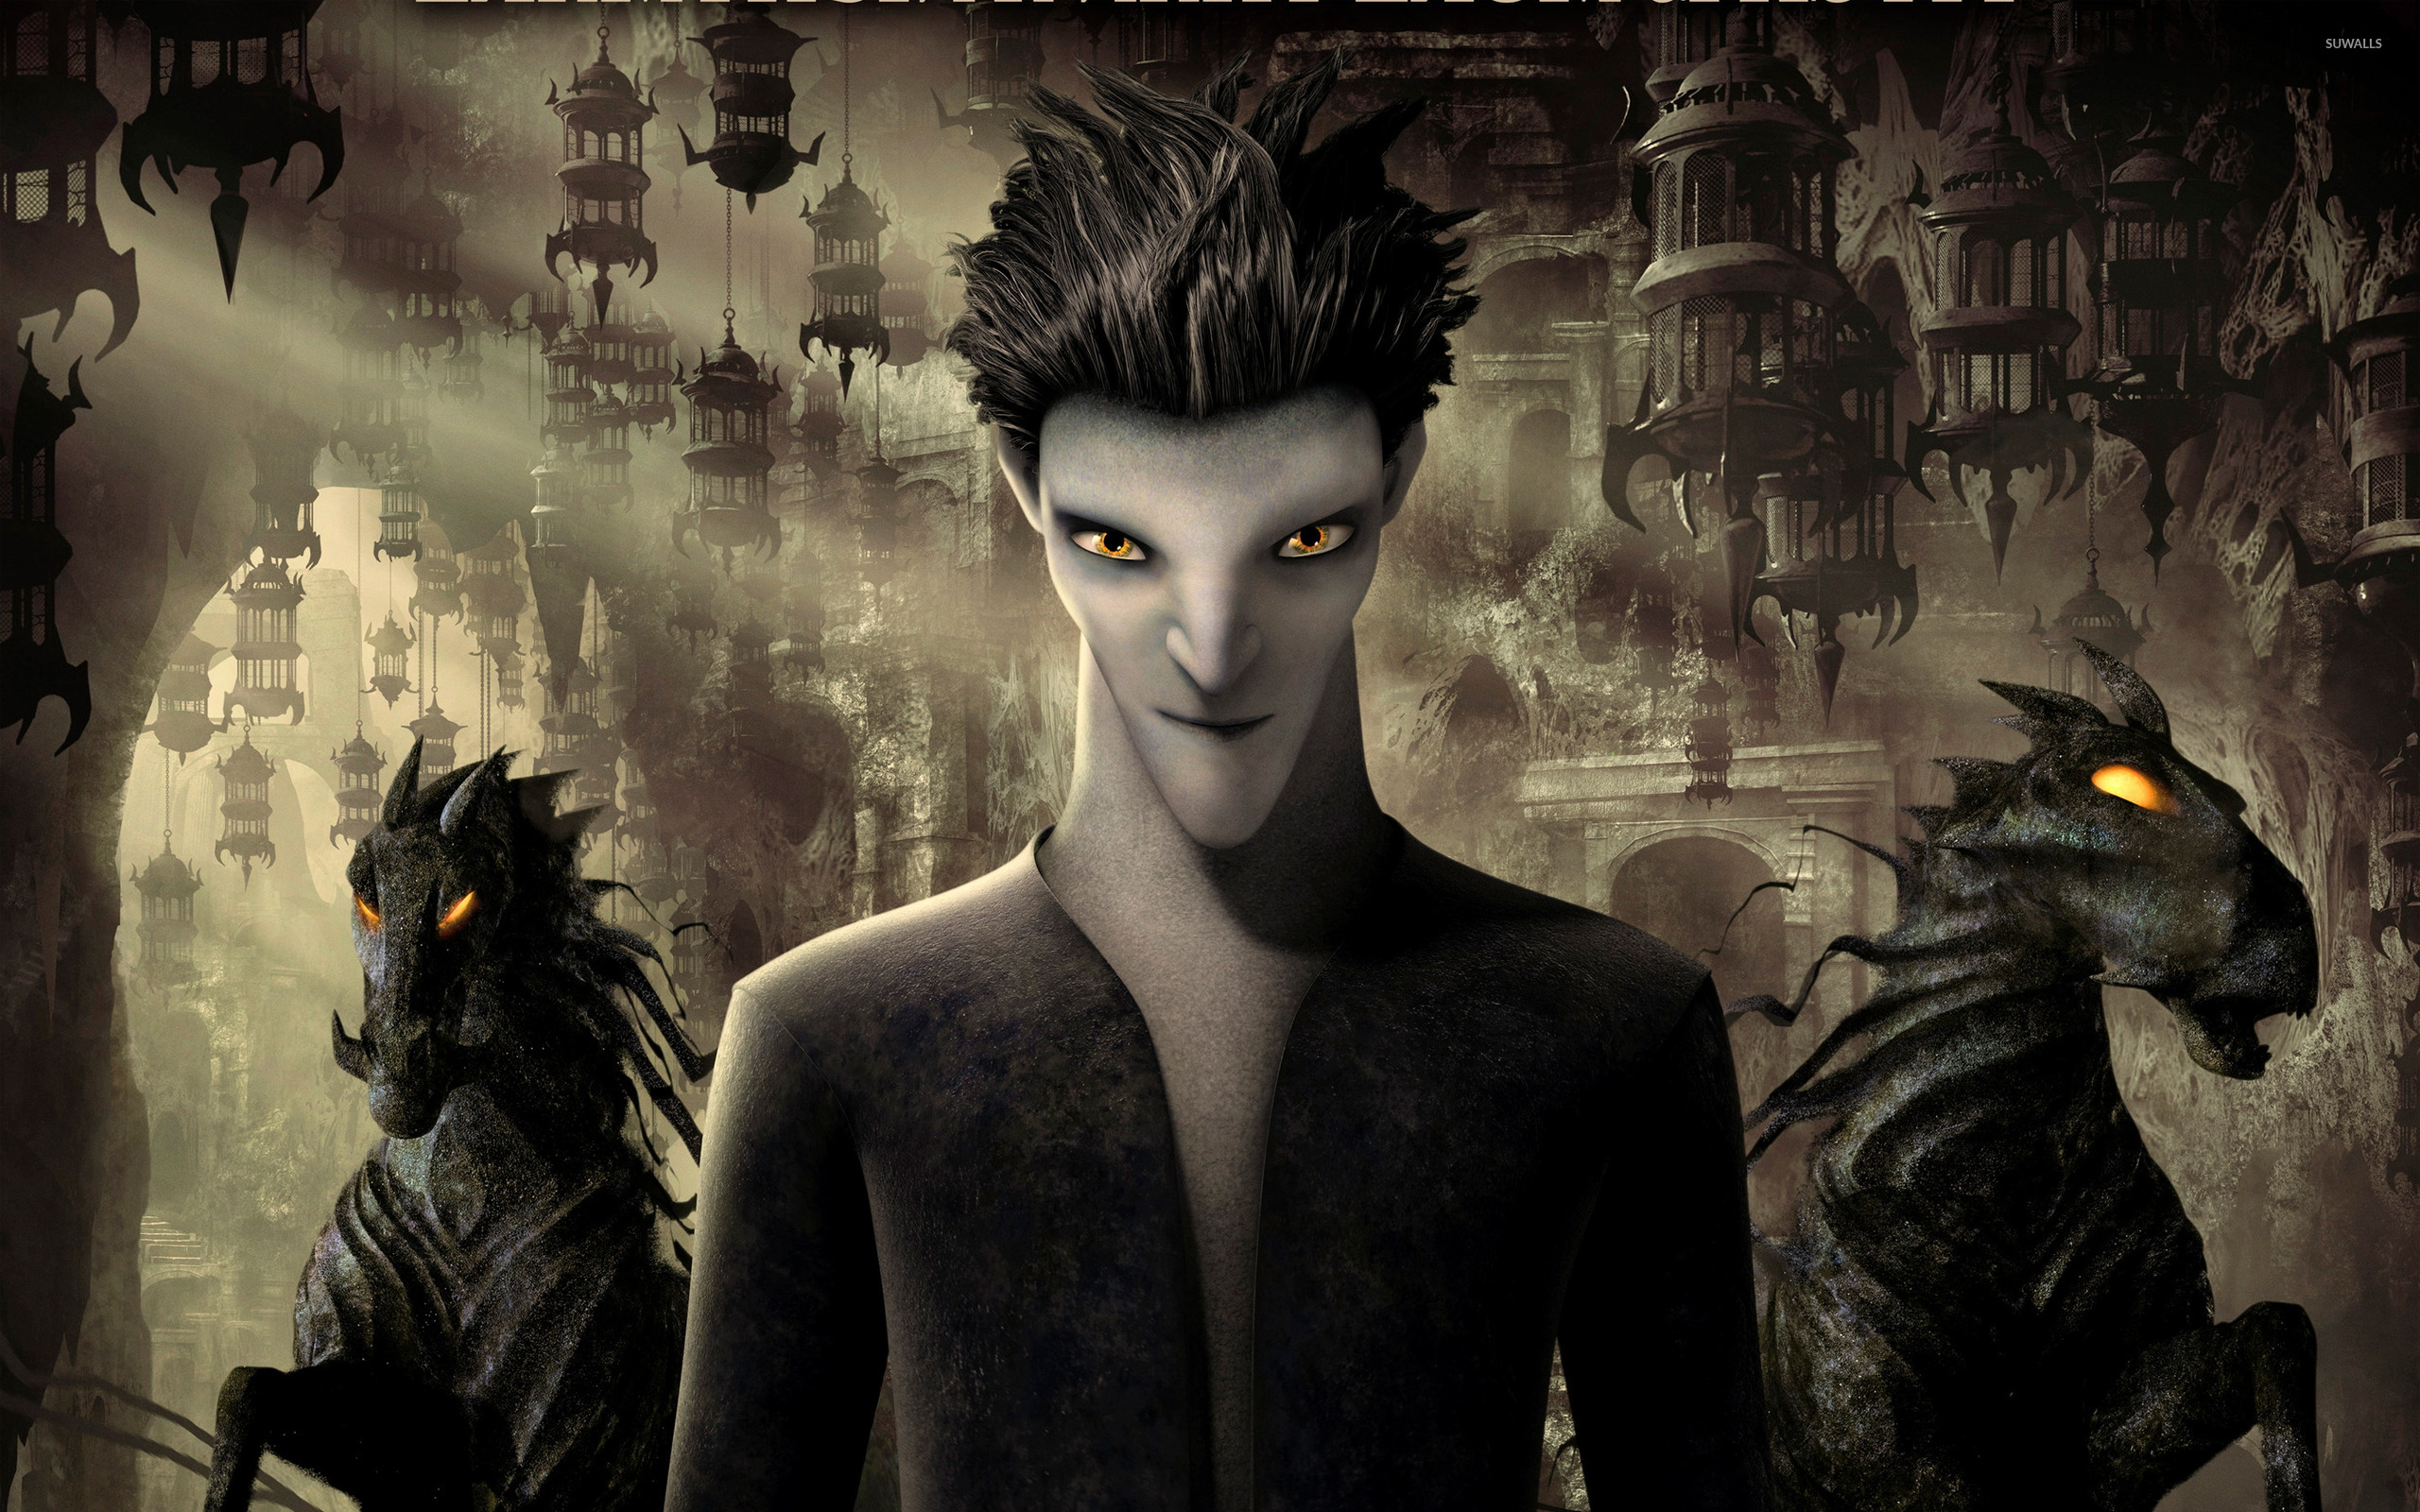 rise of the guardians pitch black